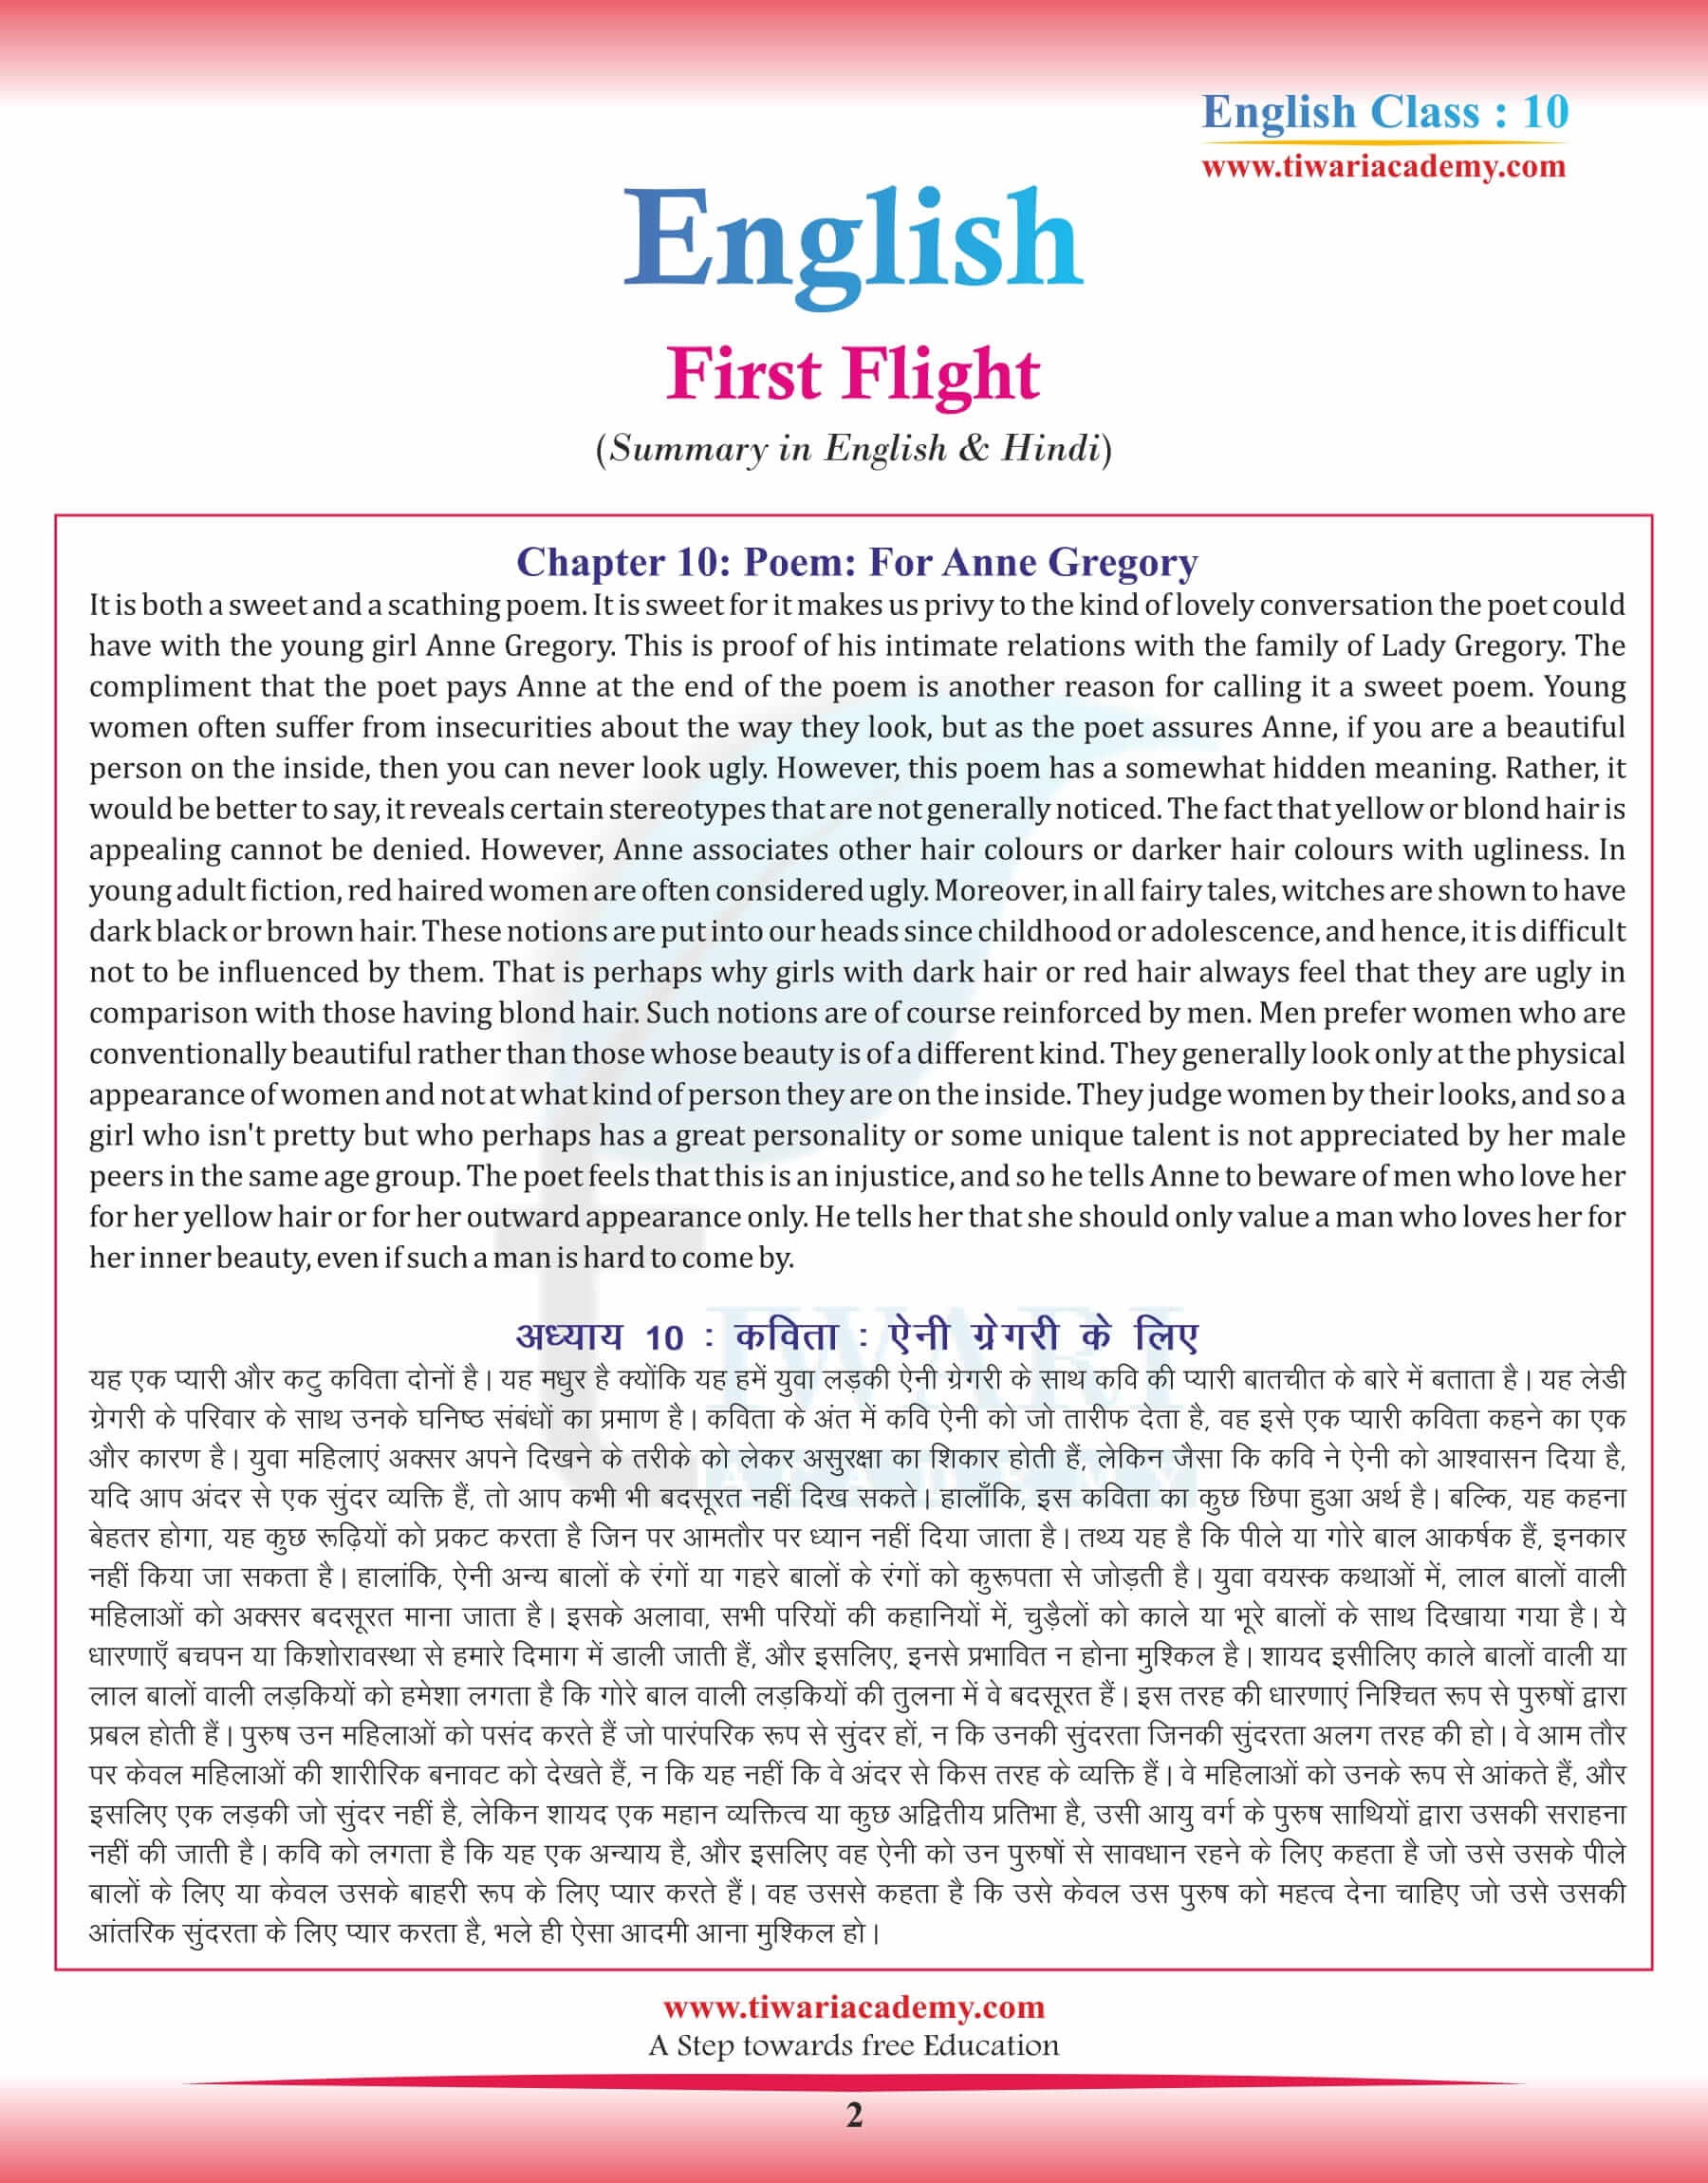 Class 10 English Chapter 10 Poem Summary in Hindi